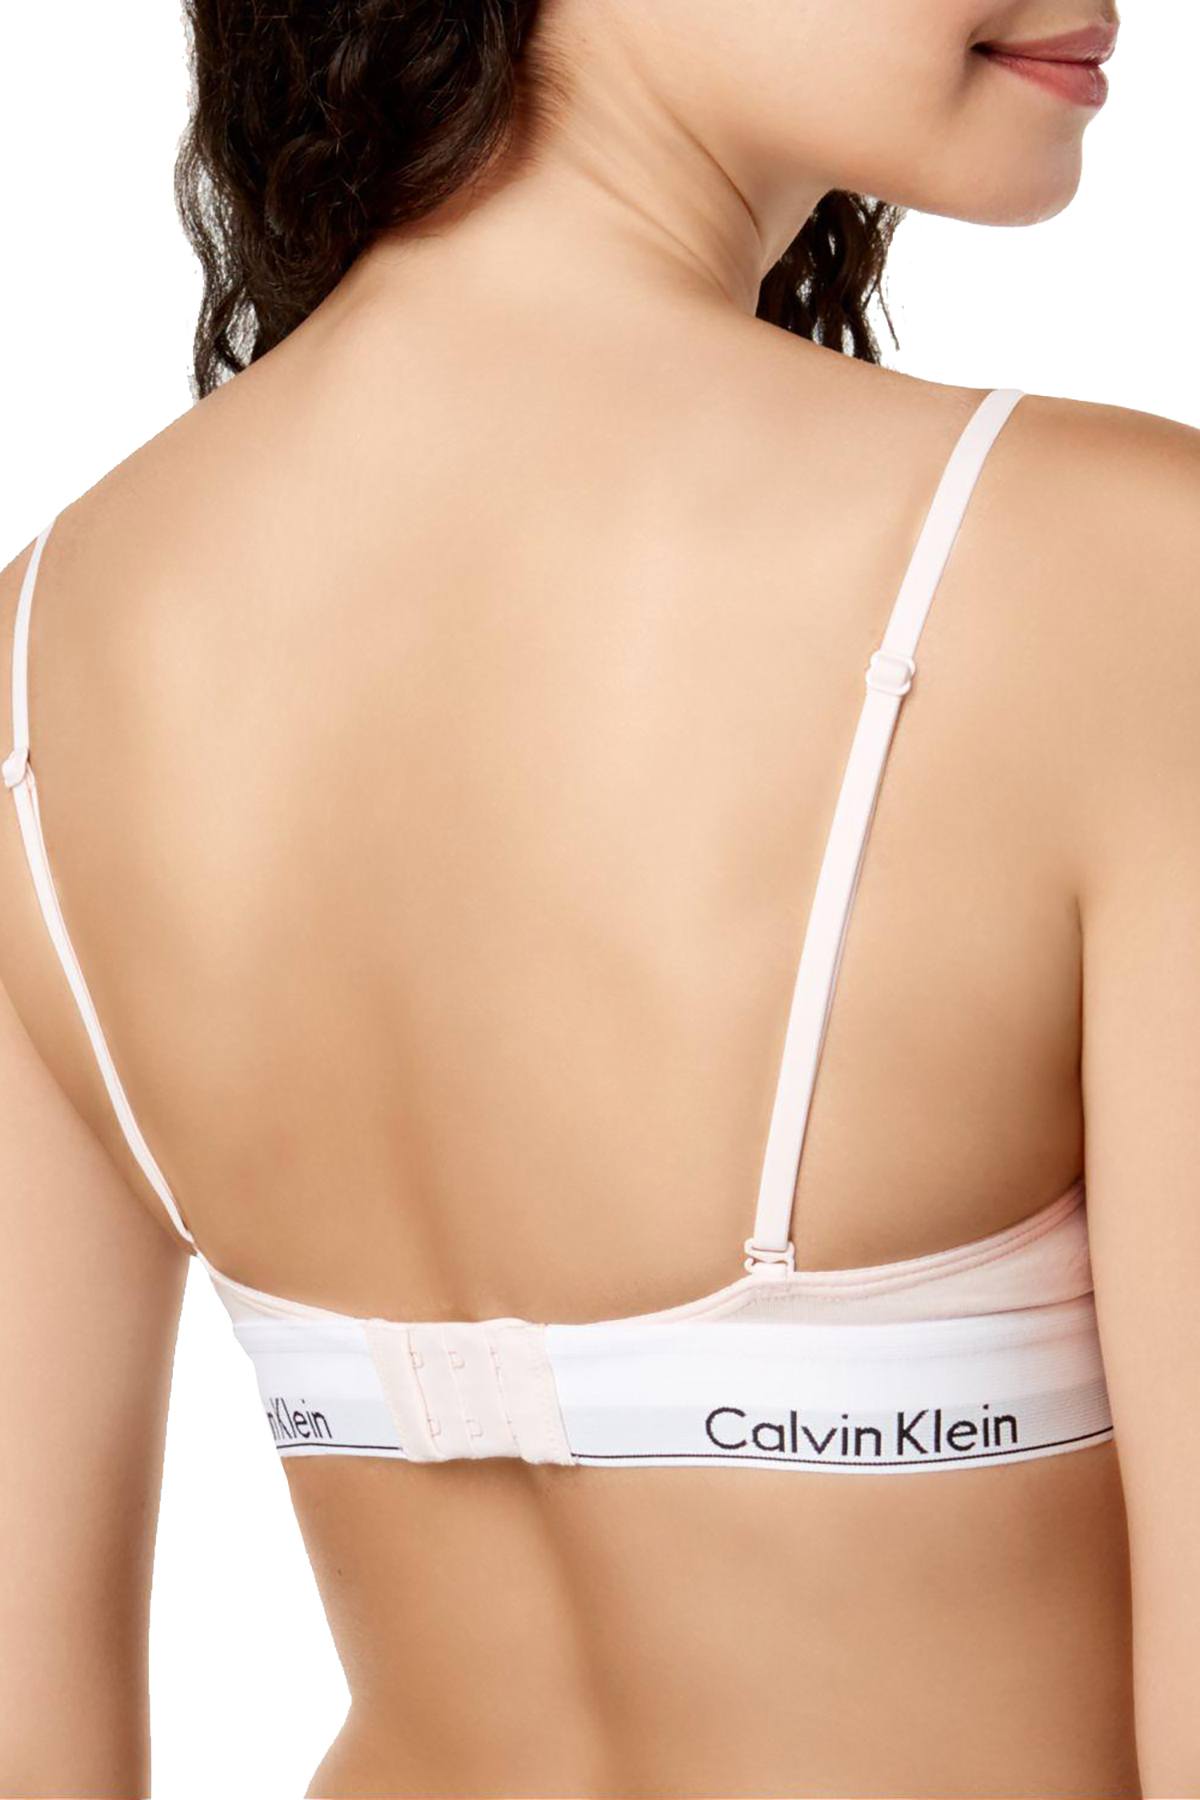 Calvin Klein Customized Stretch Triangle Bralette In Intuition